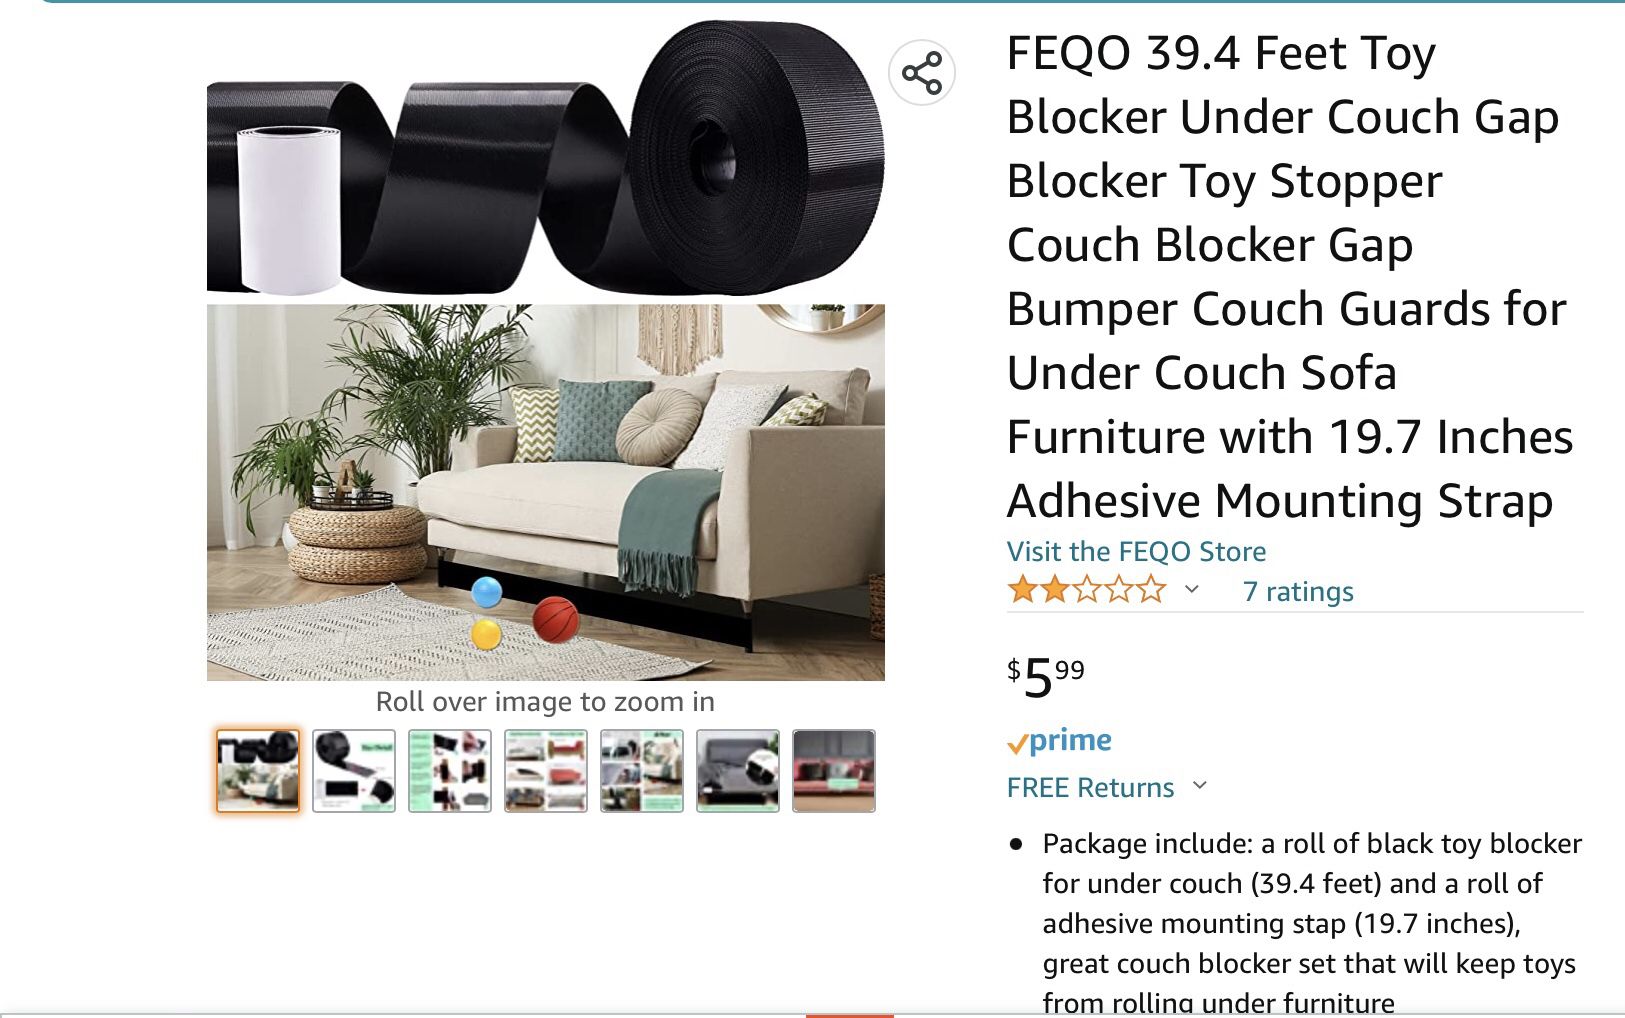 Toy Blocker For Couch $10